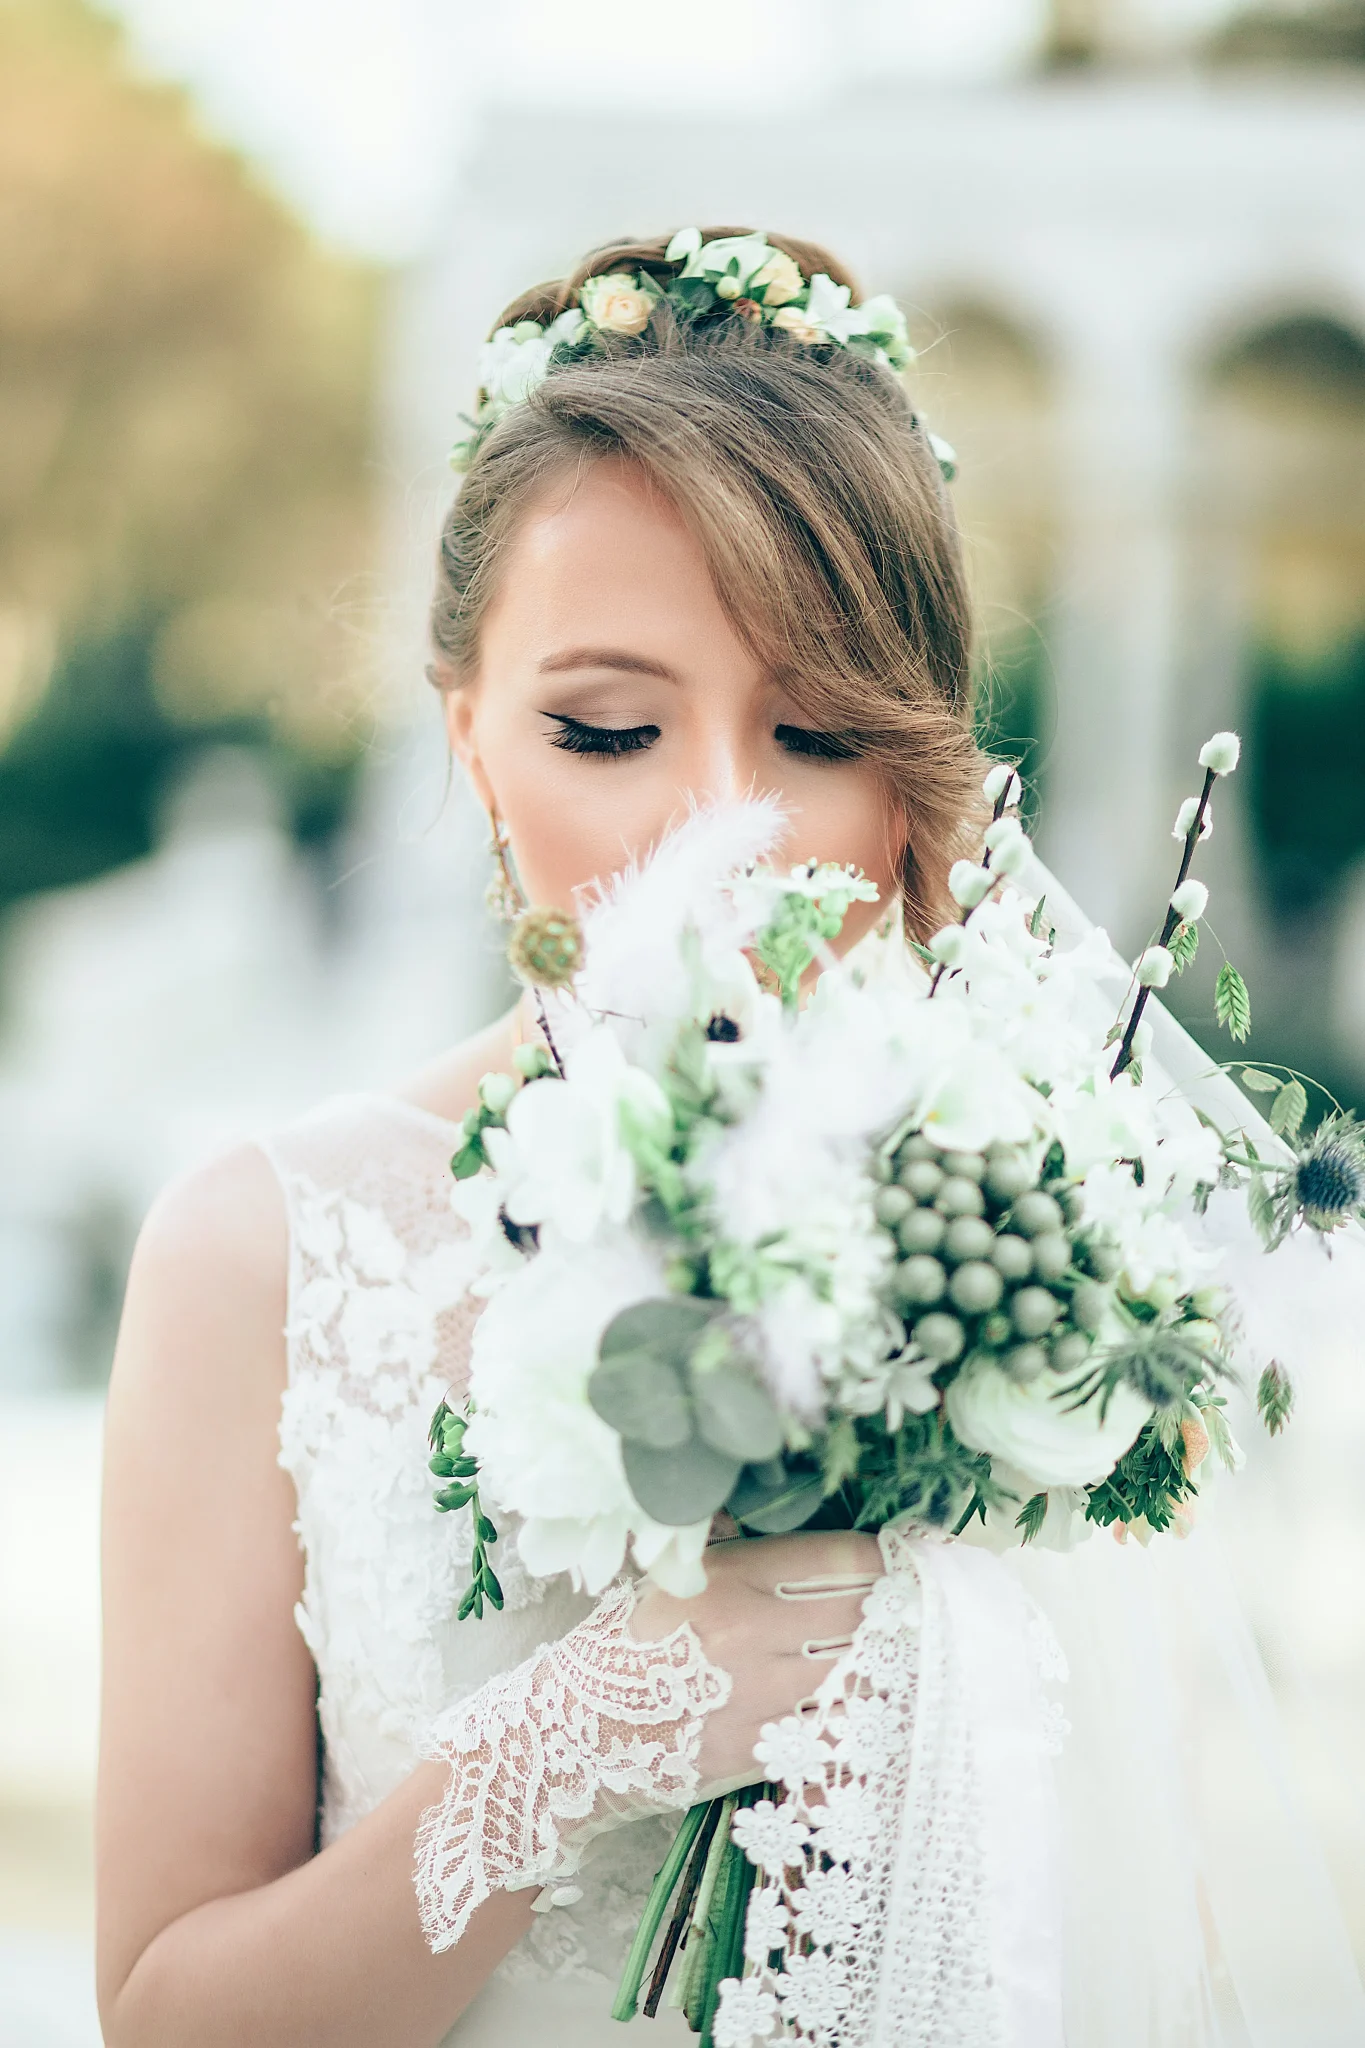 Is Wedding Videography Really Worth It?